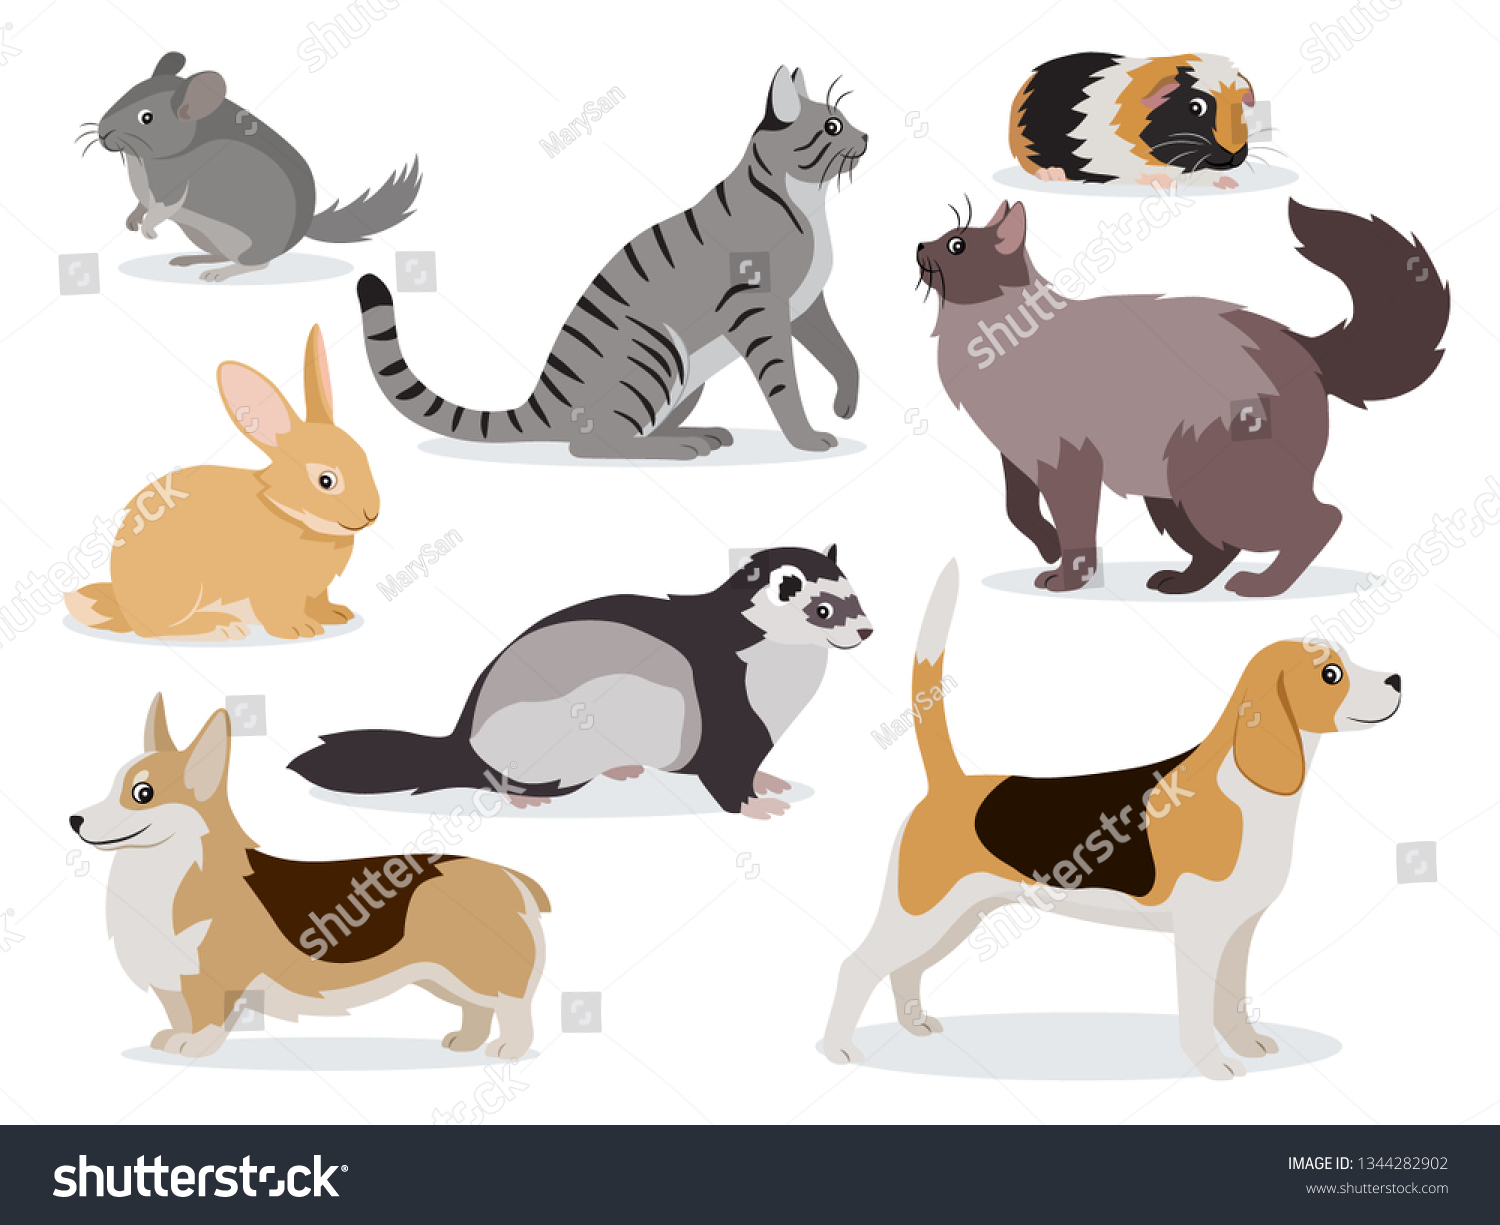 SVG of Pets icon set, cute gray chinchilla, fluffy ferret, smooth coated and domestic long-haired cats, corgi, beagle, dogs, rabbit, guinea pig isolated, vector illustration in flat style svg